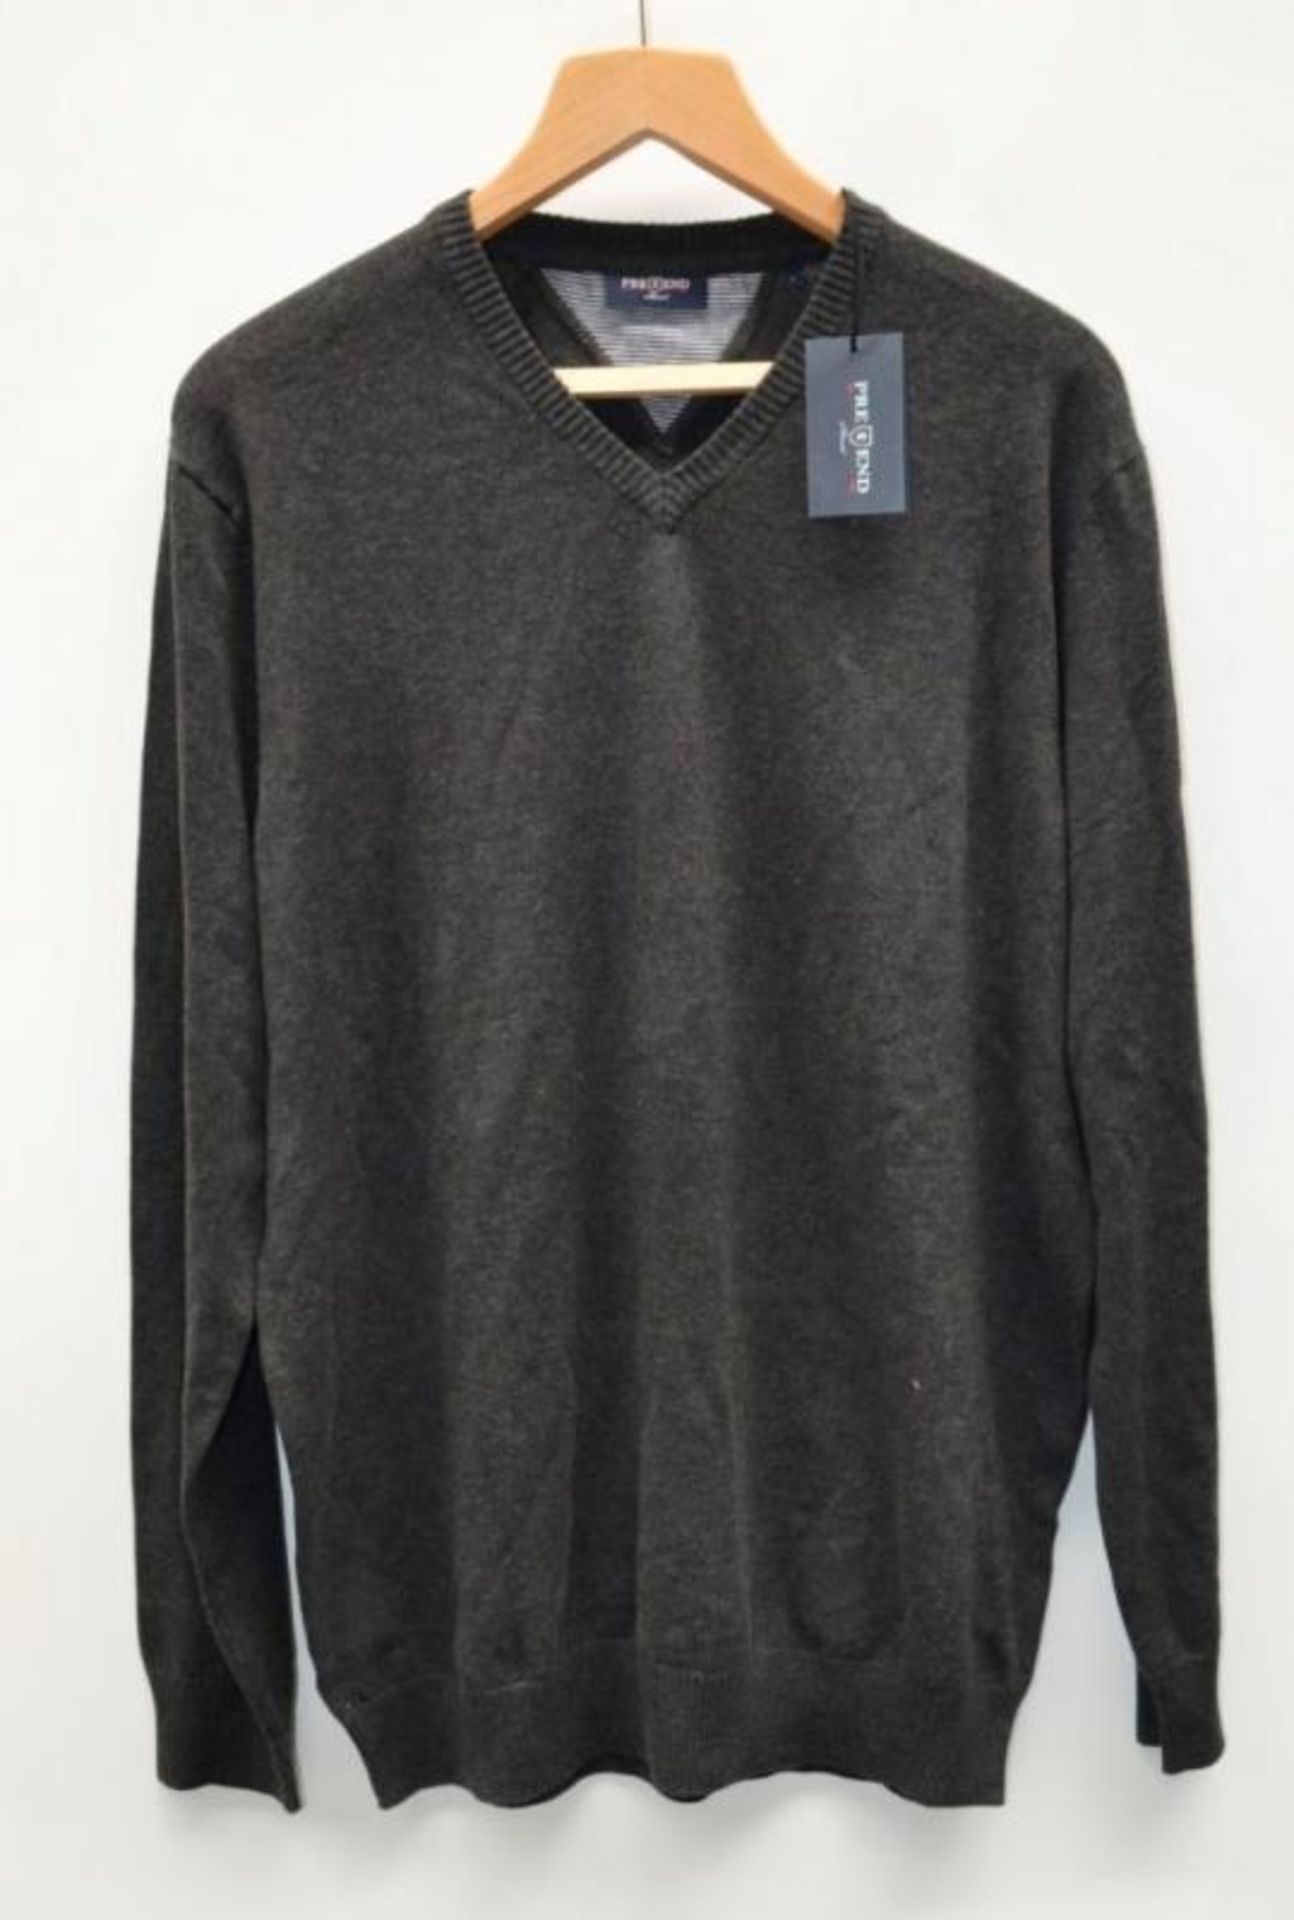 5 x Assorted Pre End Branded Mens Long Sleeve Knitware / Jumpers - New Stock With Tags - Recent - Image 3 of 7